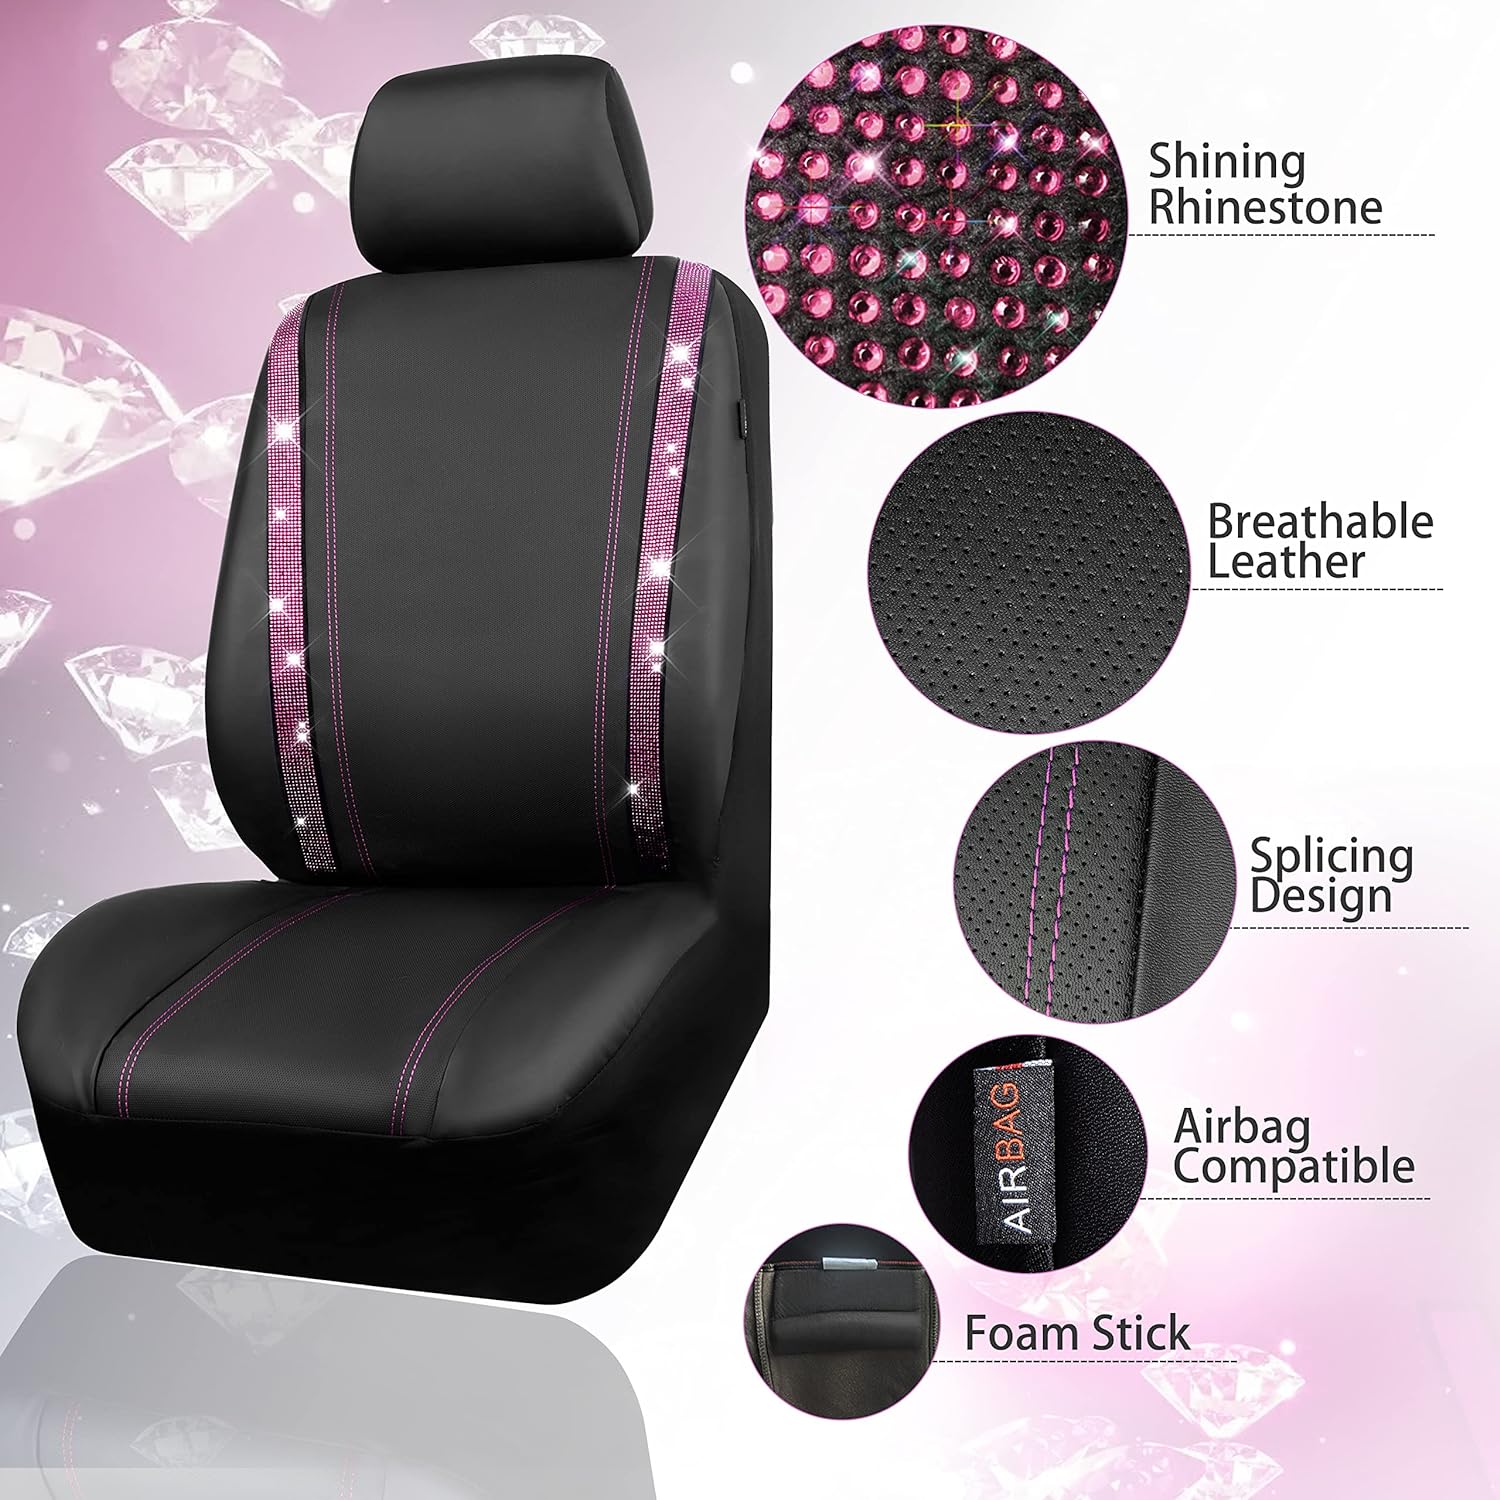 CAR PASS Bling Diamond Car Floor Mats & Car Steering Wheel Cover & Car Seat Cover Two Front Seats